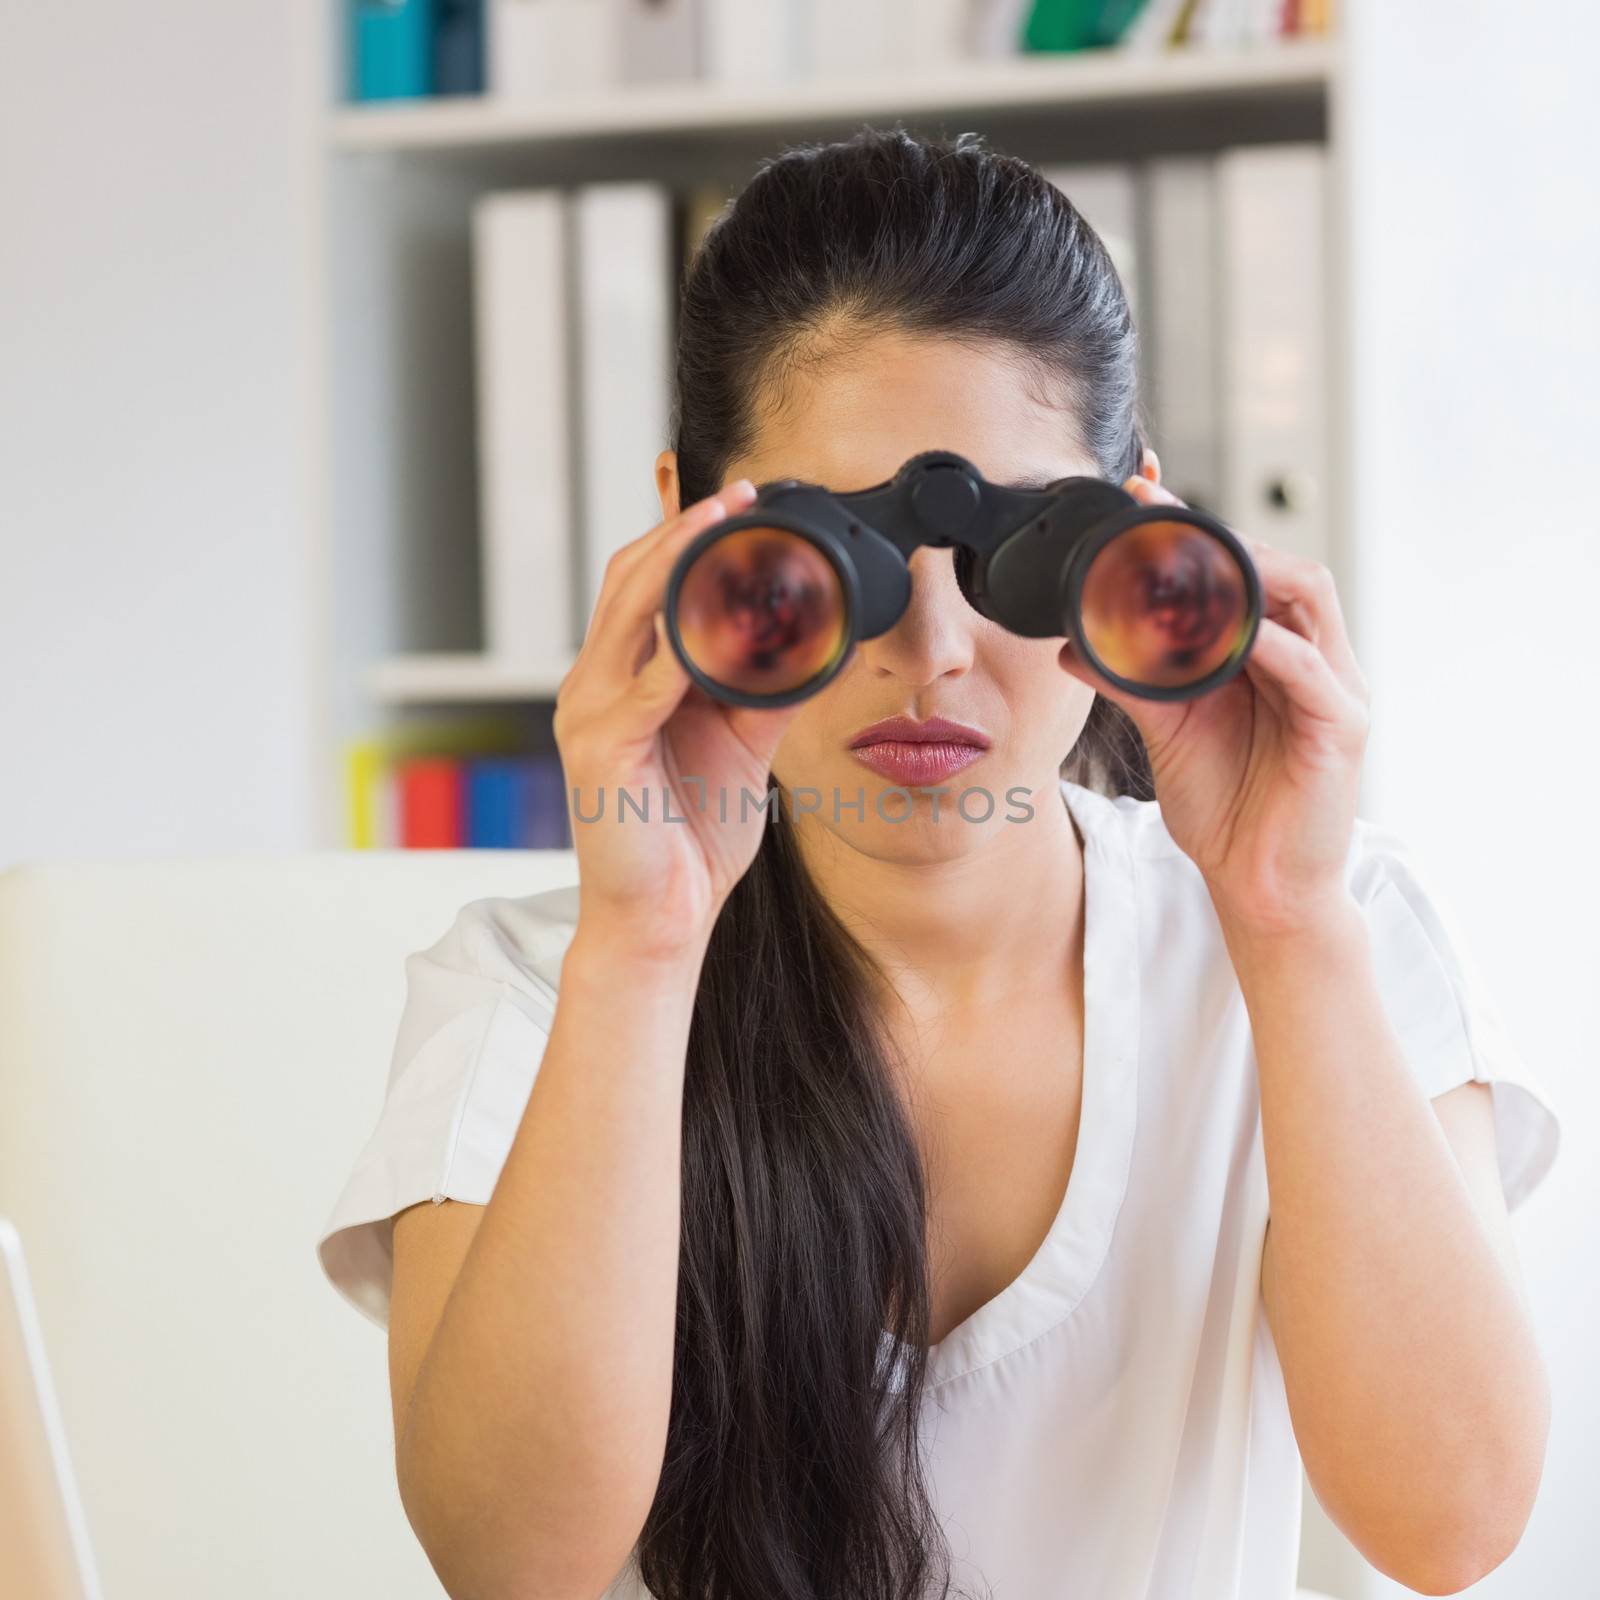 Young determined businesswoman looking through binoculars in office